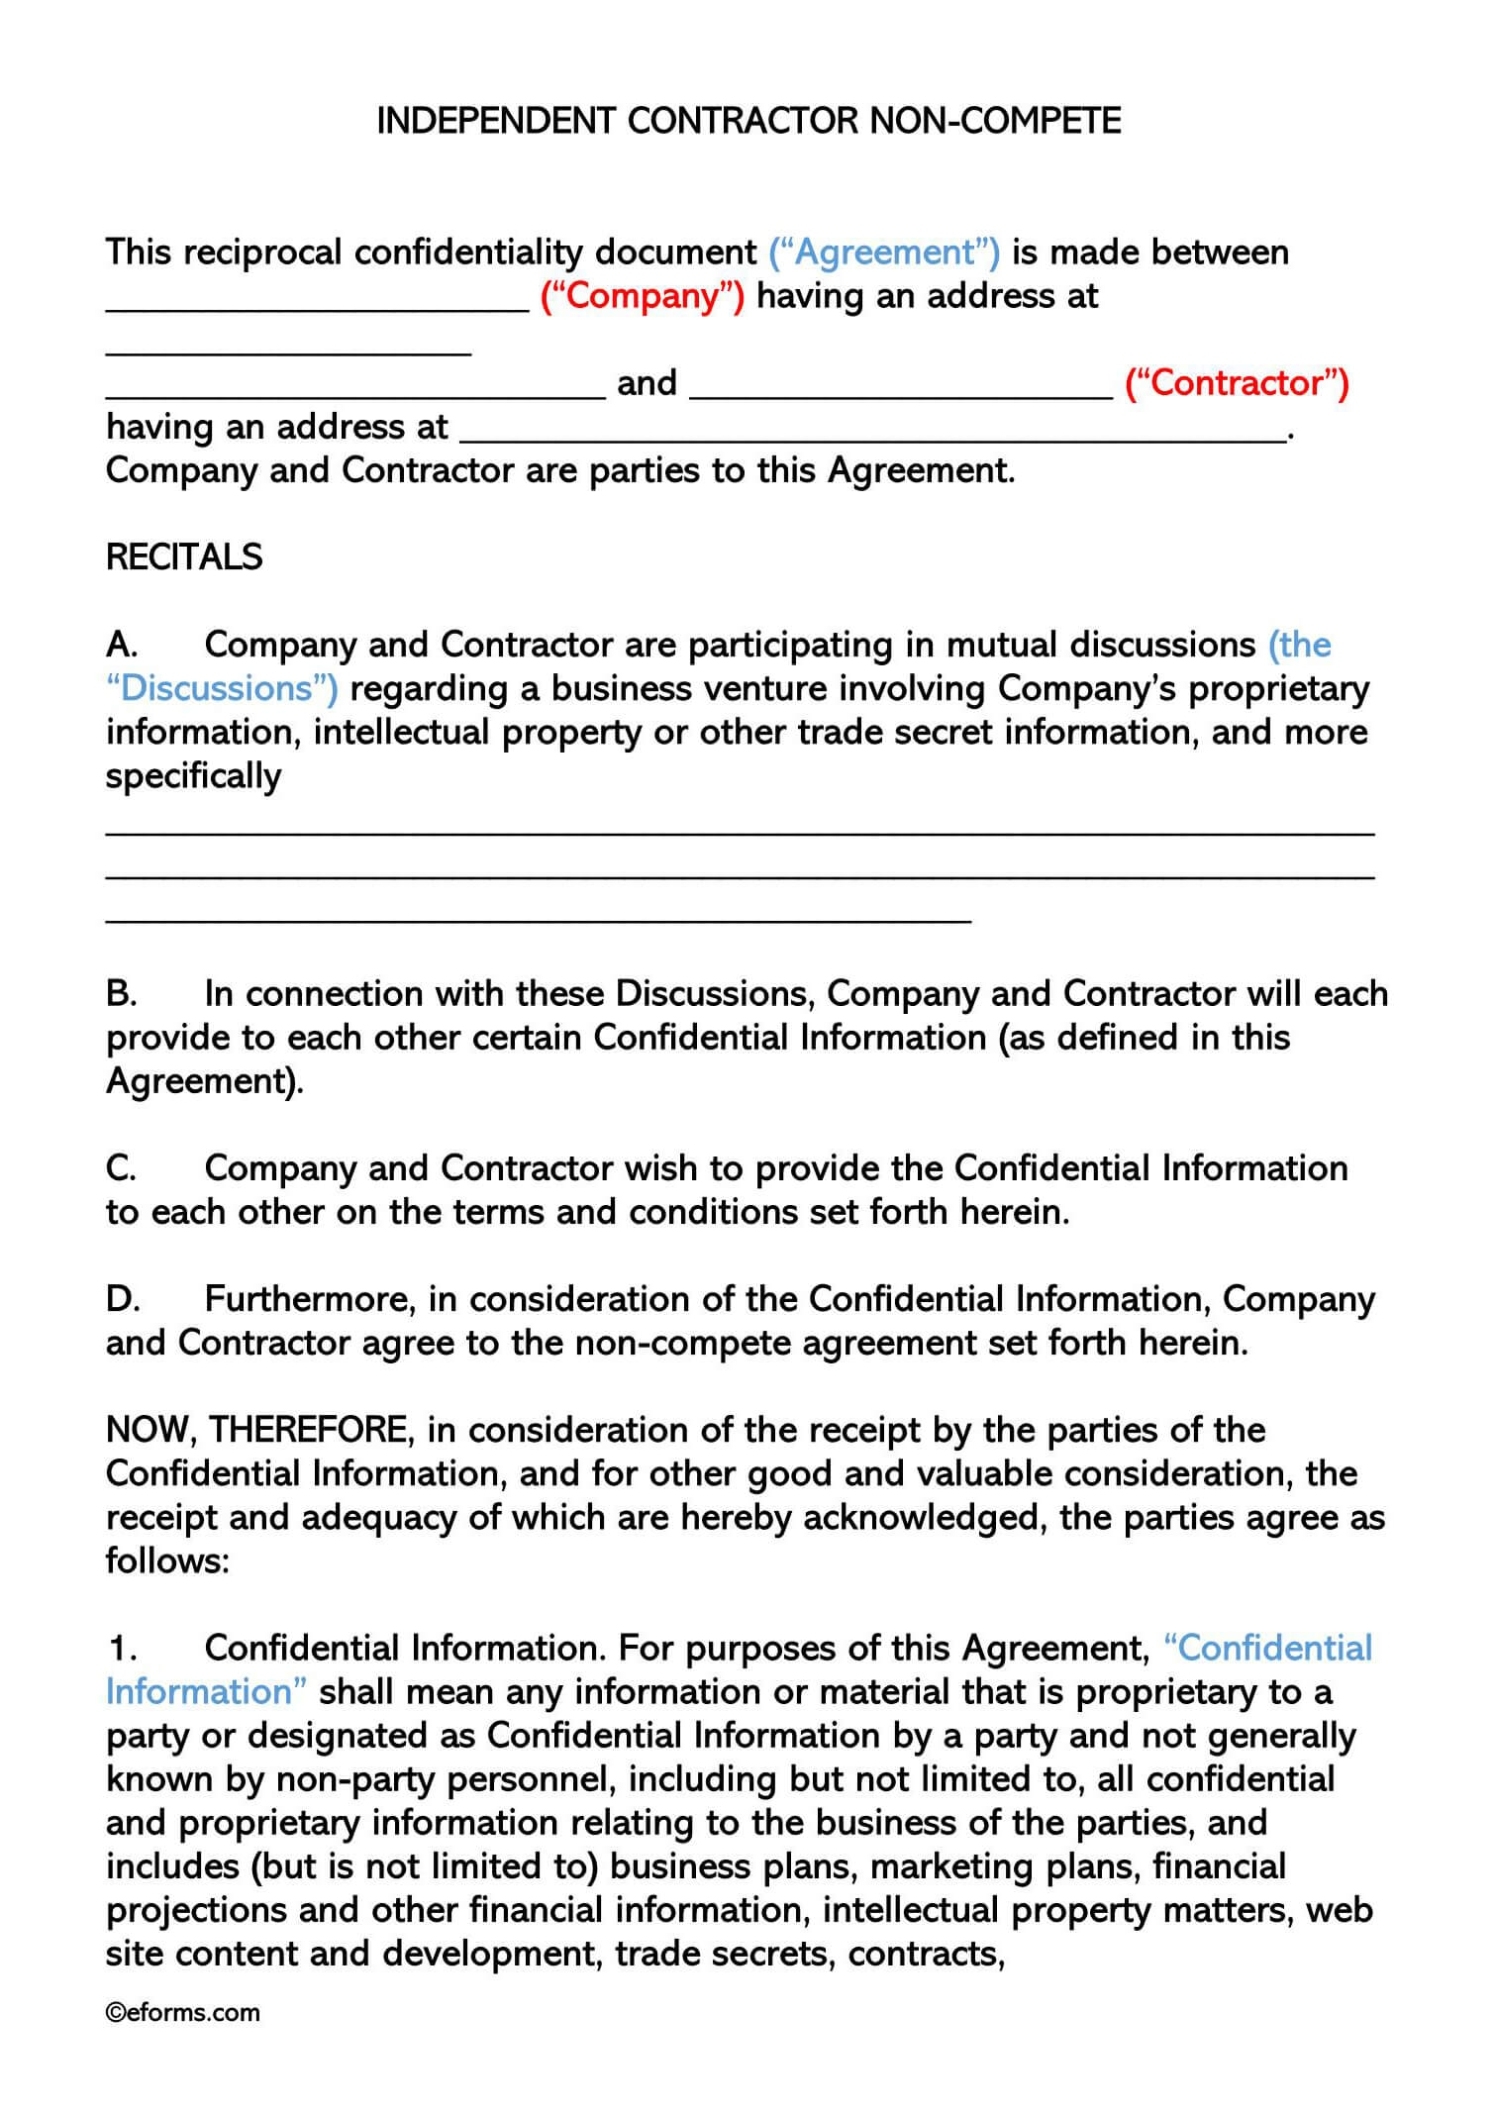 Free Independent Contractor Non Compete Agreement Templates With Regard To Free Non Compete Agreement Template